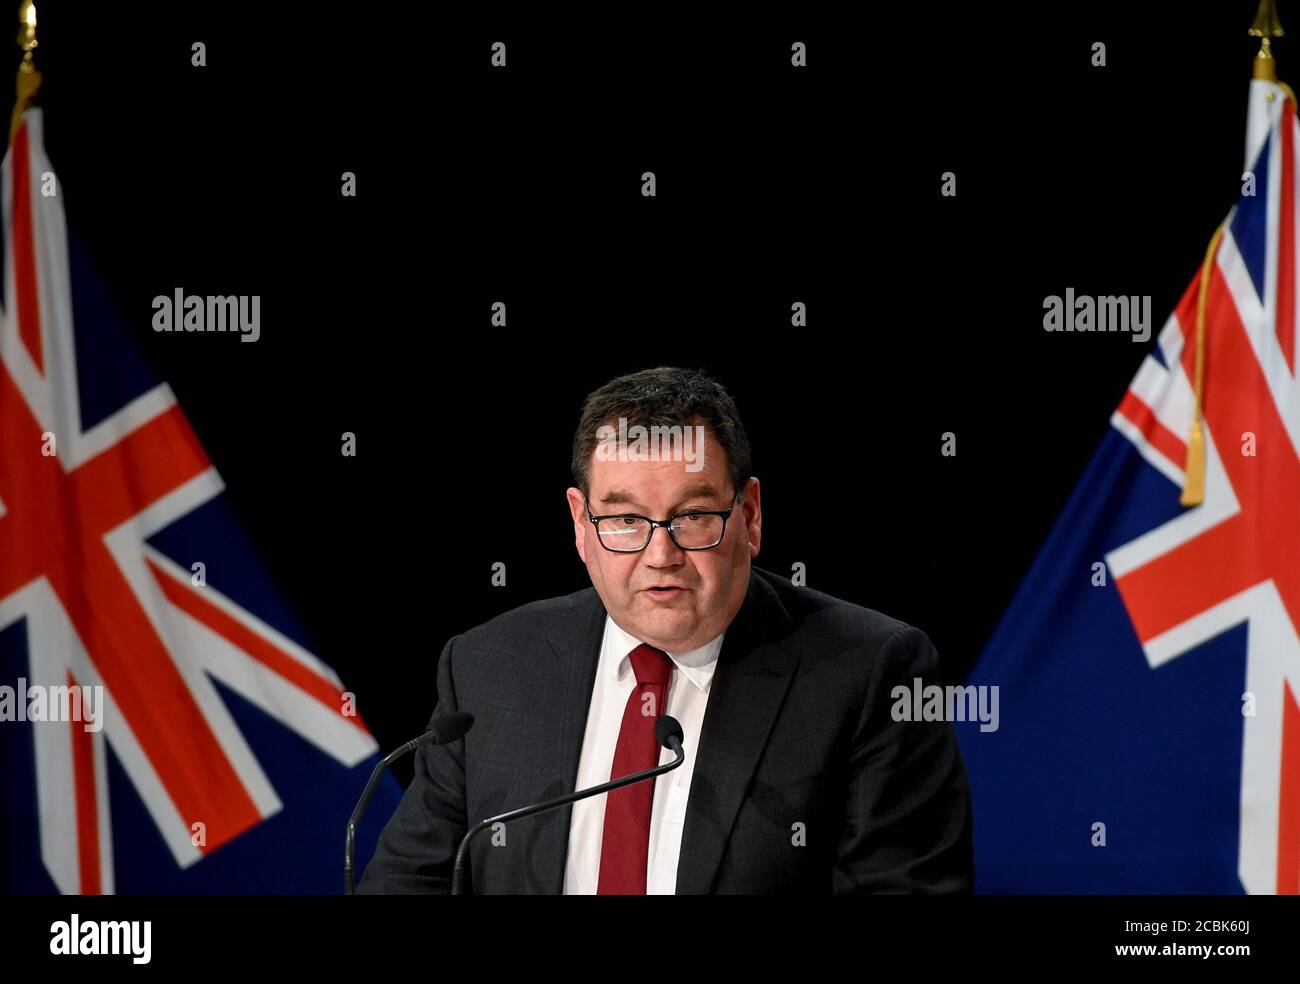 Wellington, New Zealand. 14th Aug, 2020. New Zealand Finance Minister Grant Robertson speaks during a press conference in Wellington, New Zealand, Aug. 14, 2020. New Zealand's largest city Auckland will remain in COVID-19 Alert Level 3 for 12 more days, with the rest of the country staying in Alert Level 2, as there are currently 36 active cases, 17 of which are linked to the recent community transmission in Auckland. Credit: Guo Lei/Xinhua/Alamy Live News Stock Photo